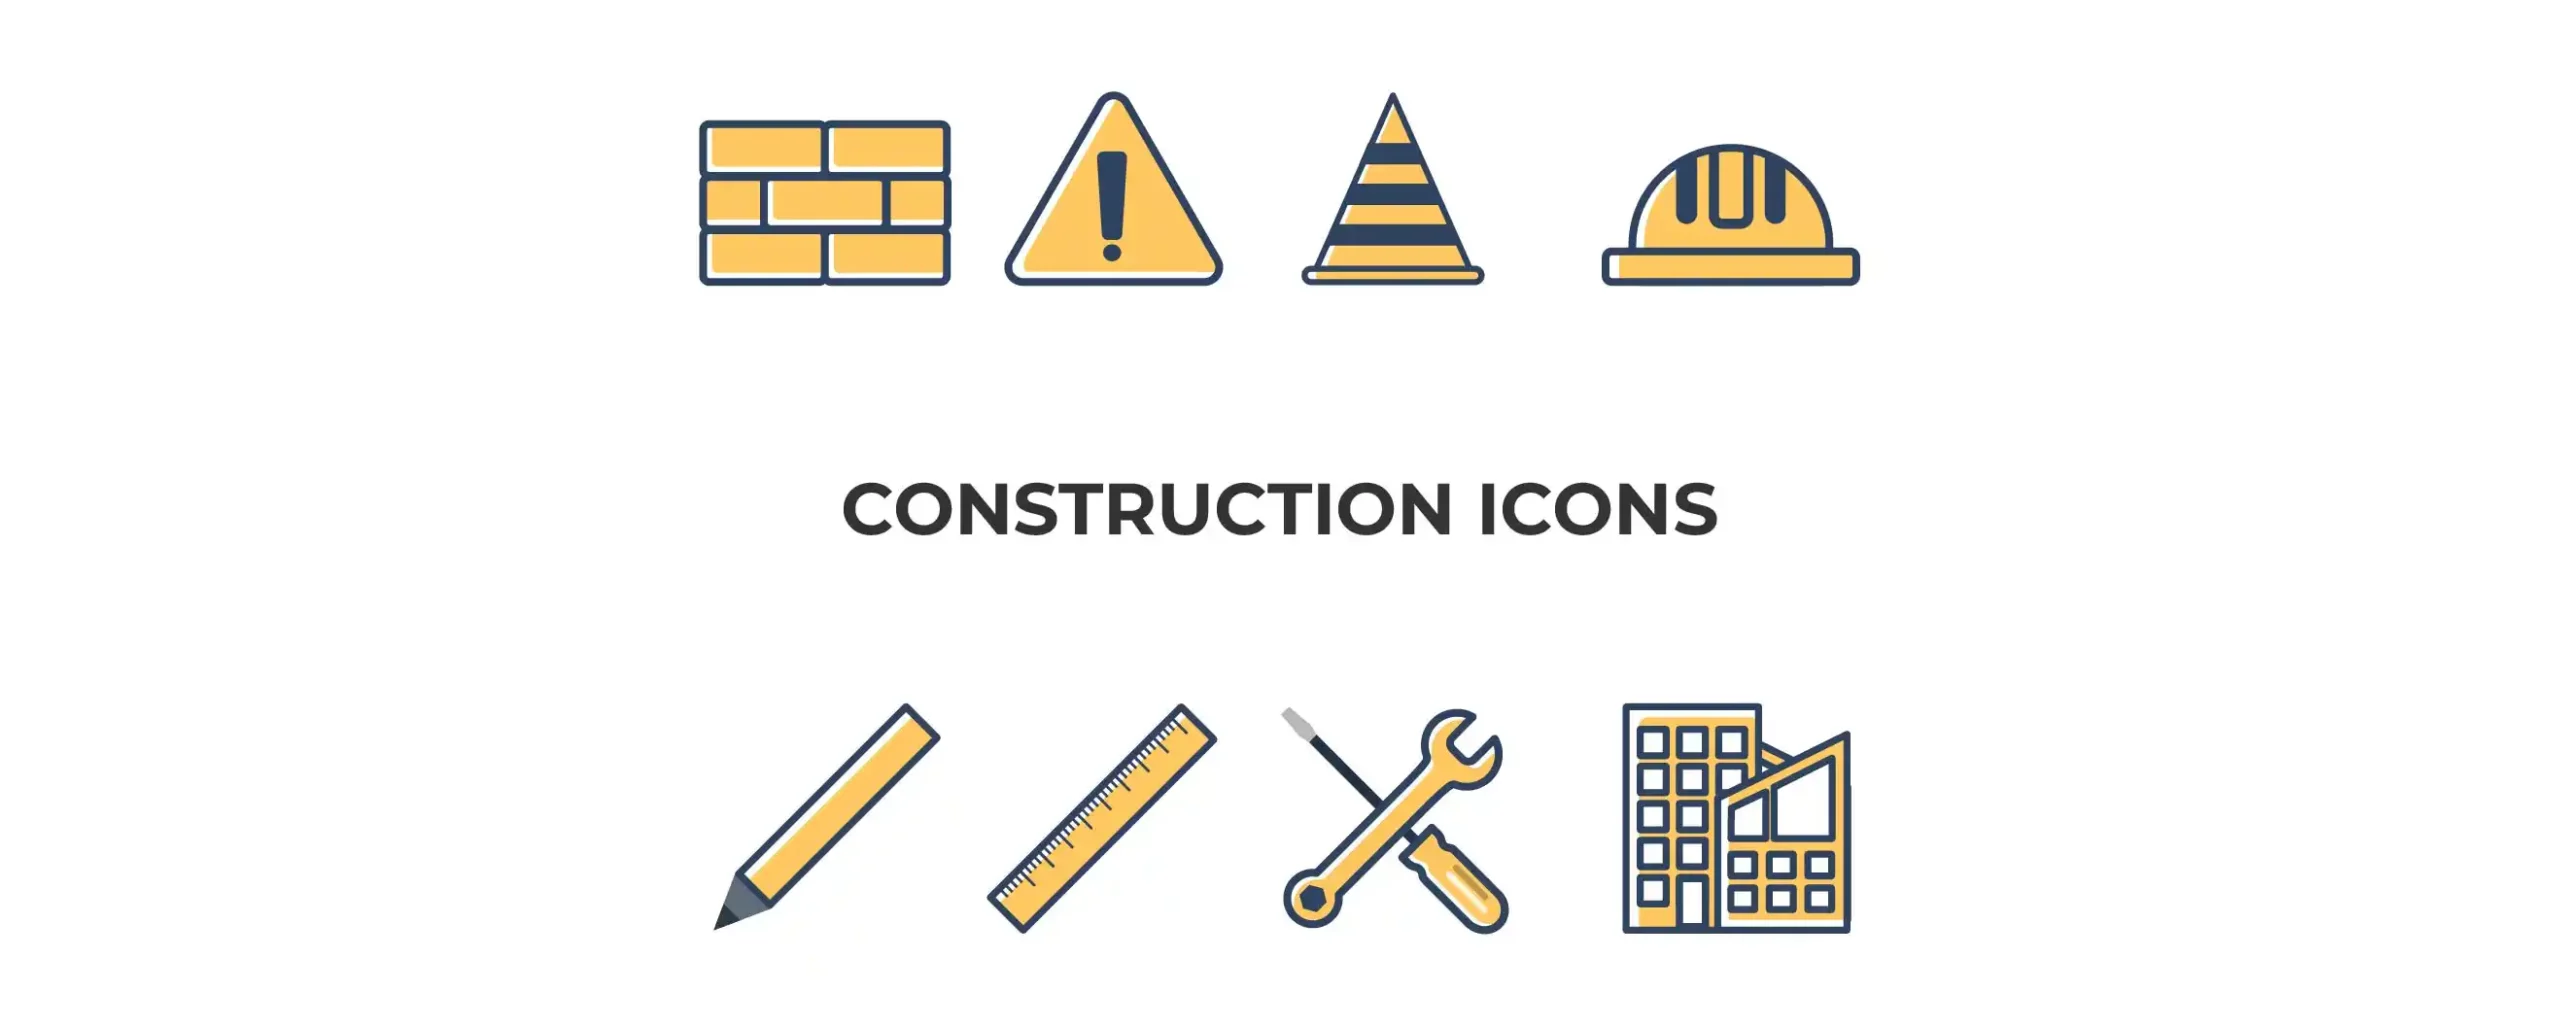 Construction Icons for you